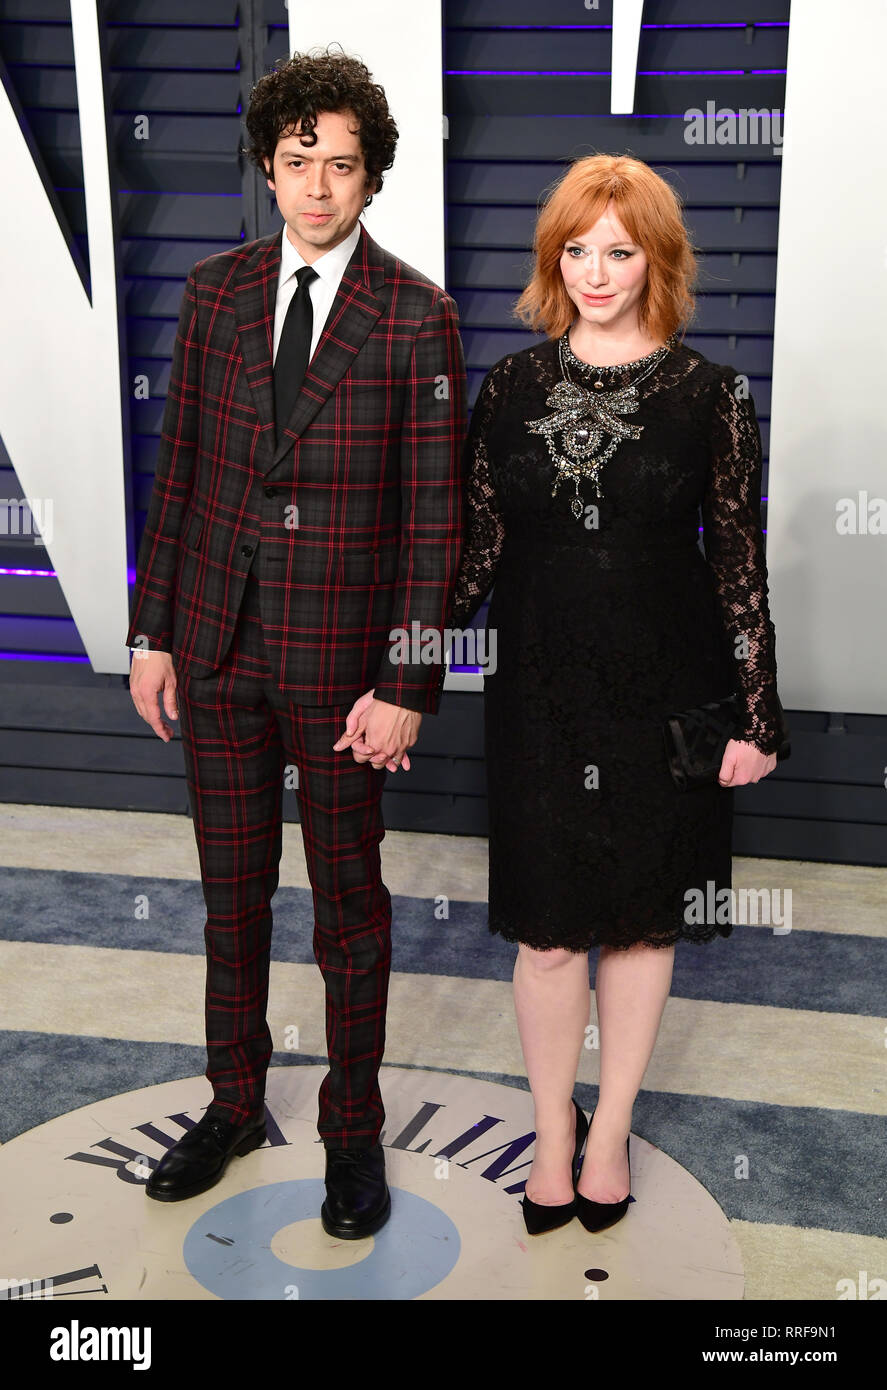 Christina Hendricks and Geoffrey Arend attending the Vanity Fair Oscar Party held at the Wallis Annenberg Center for the Performing Arts in Beverly Hills, Los Angeles, California, USA. Stock Photo